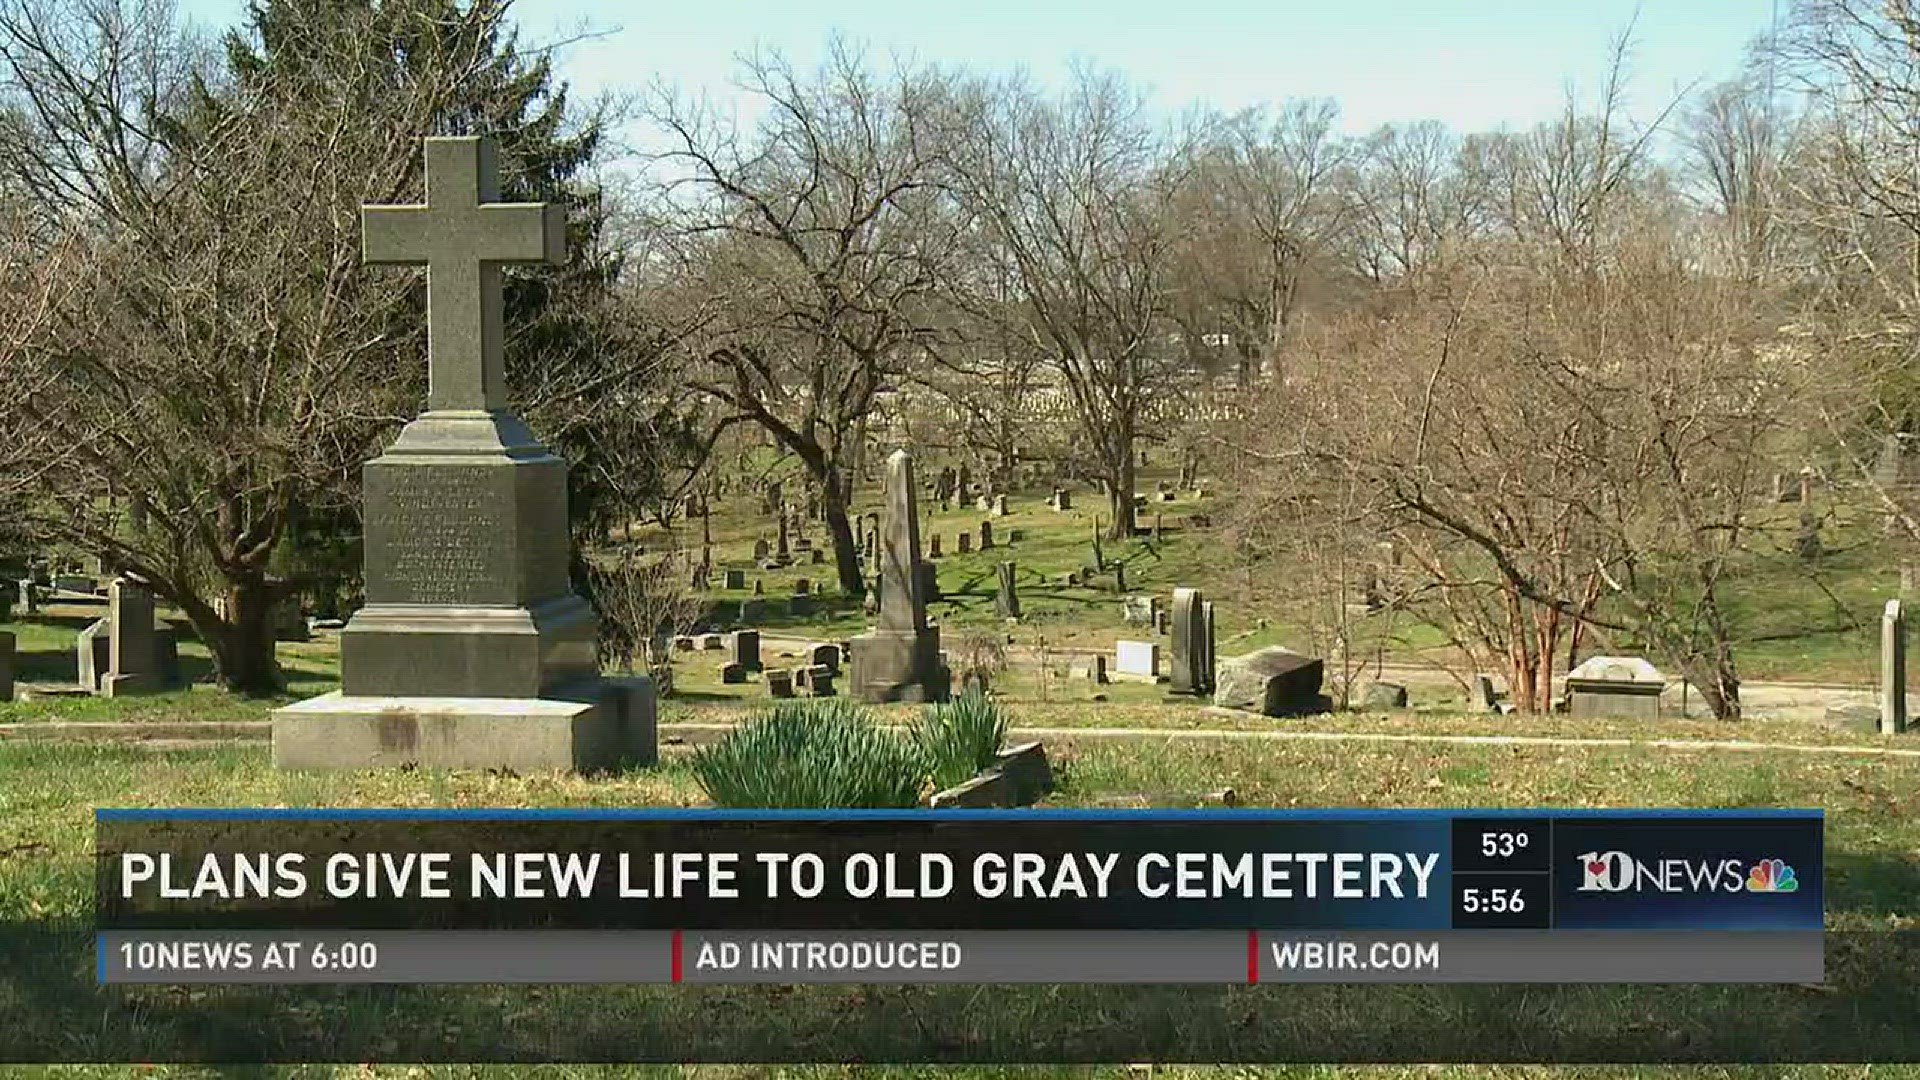 March 2, 2017: A new public fundraising campaign is meant to help restore some of the shine to Old Gray Cemetery.